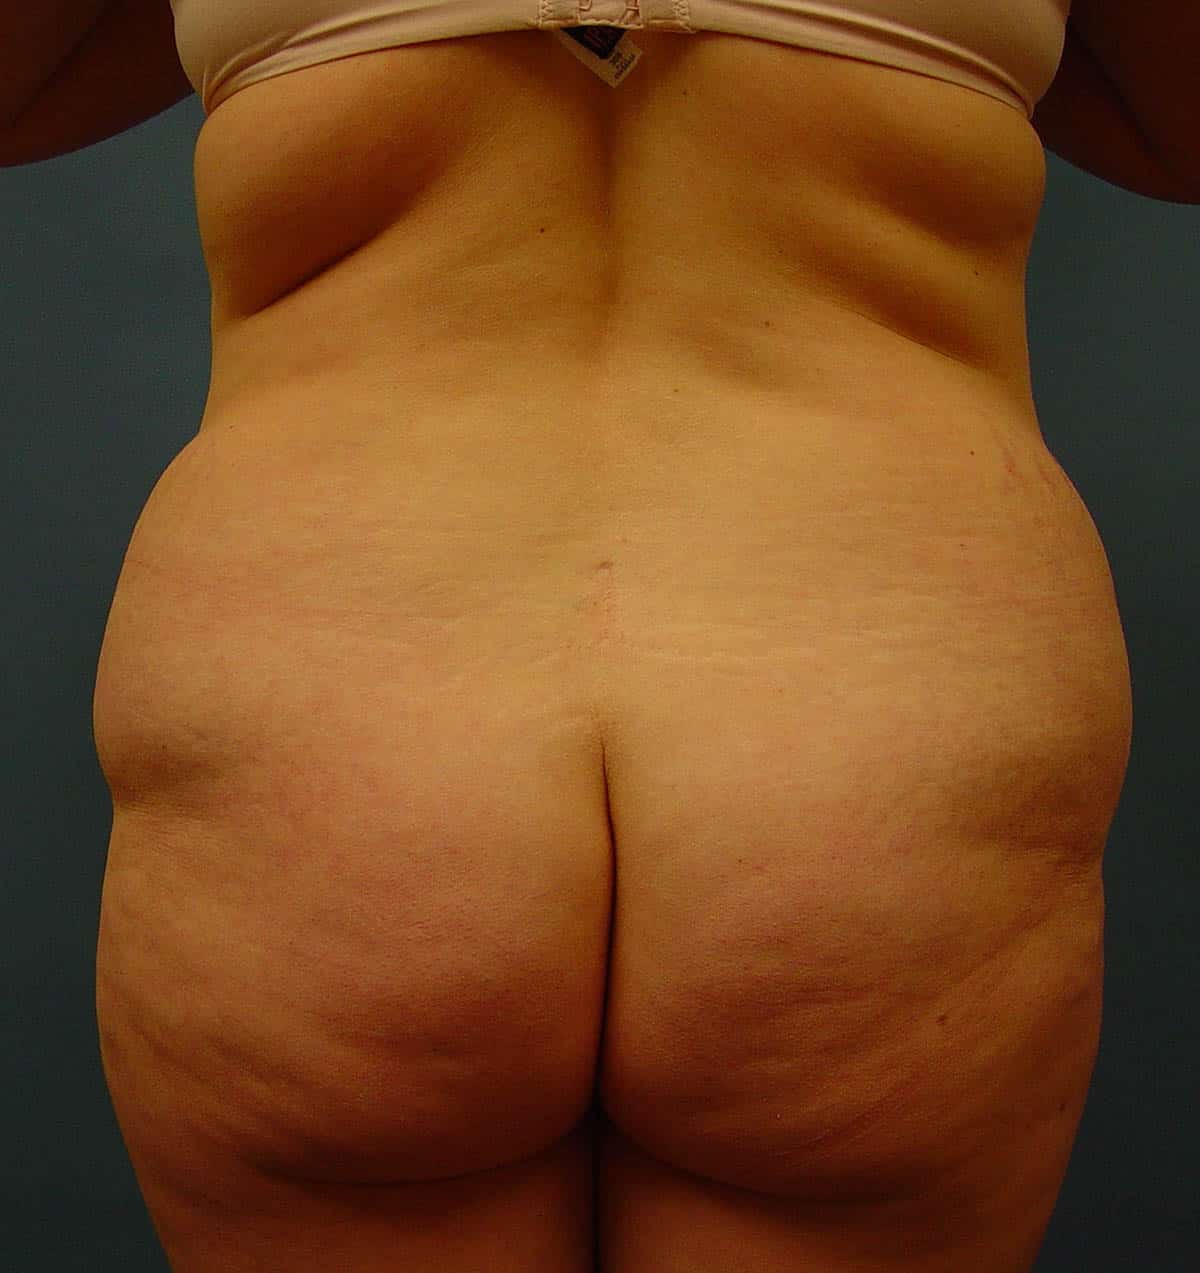 BEFORE back fat removal